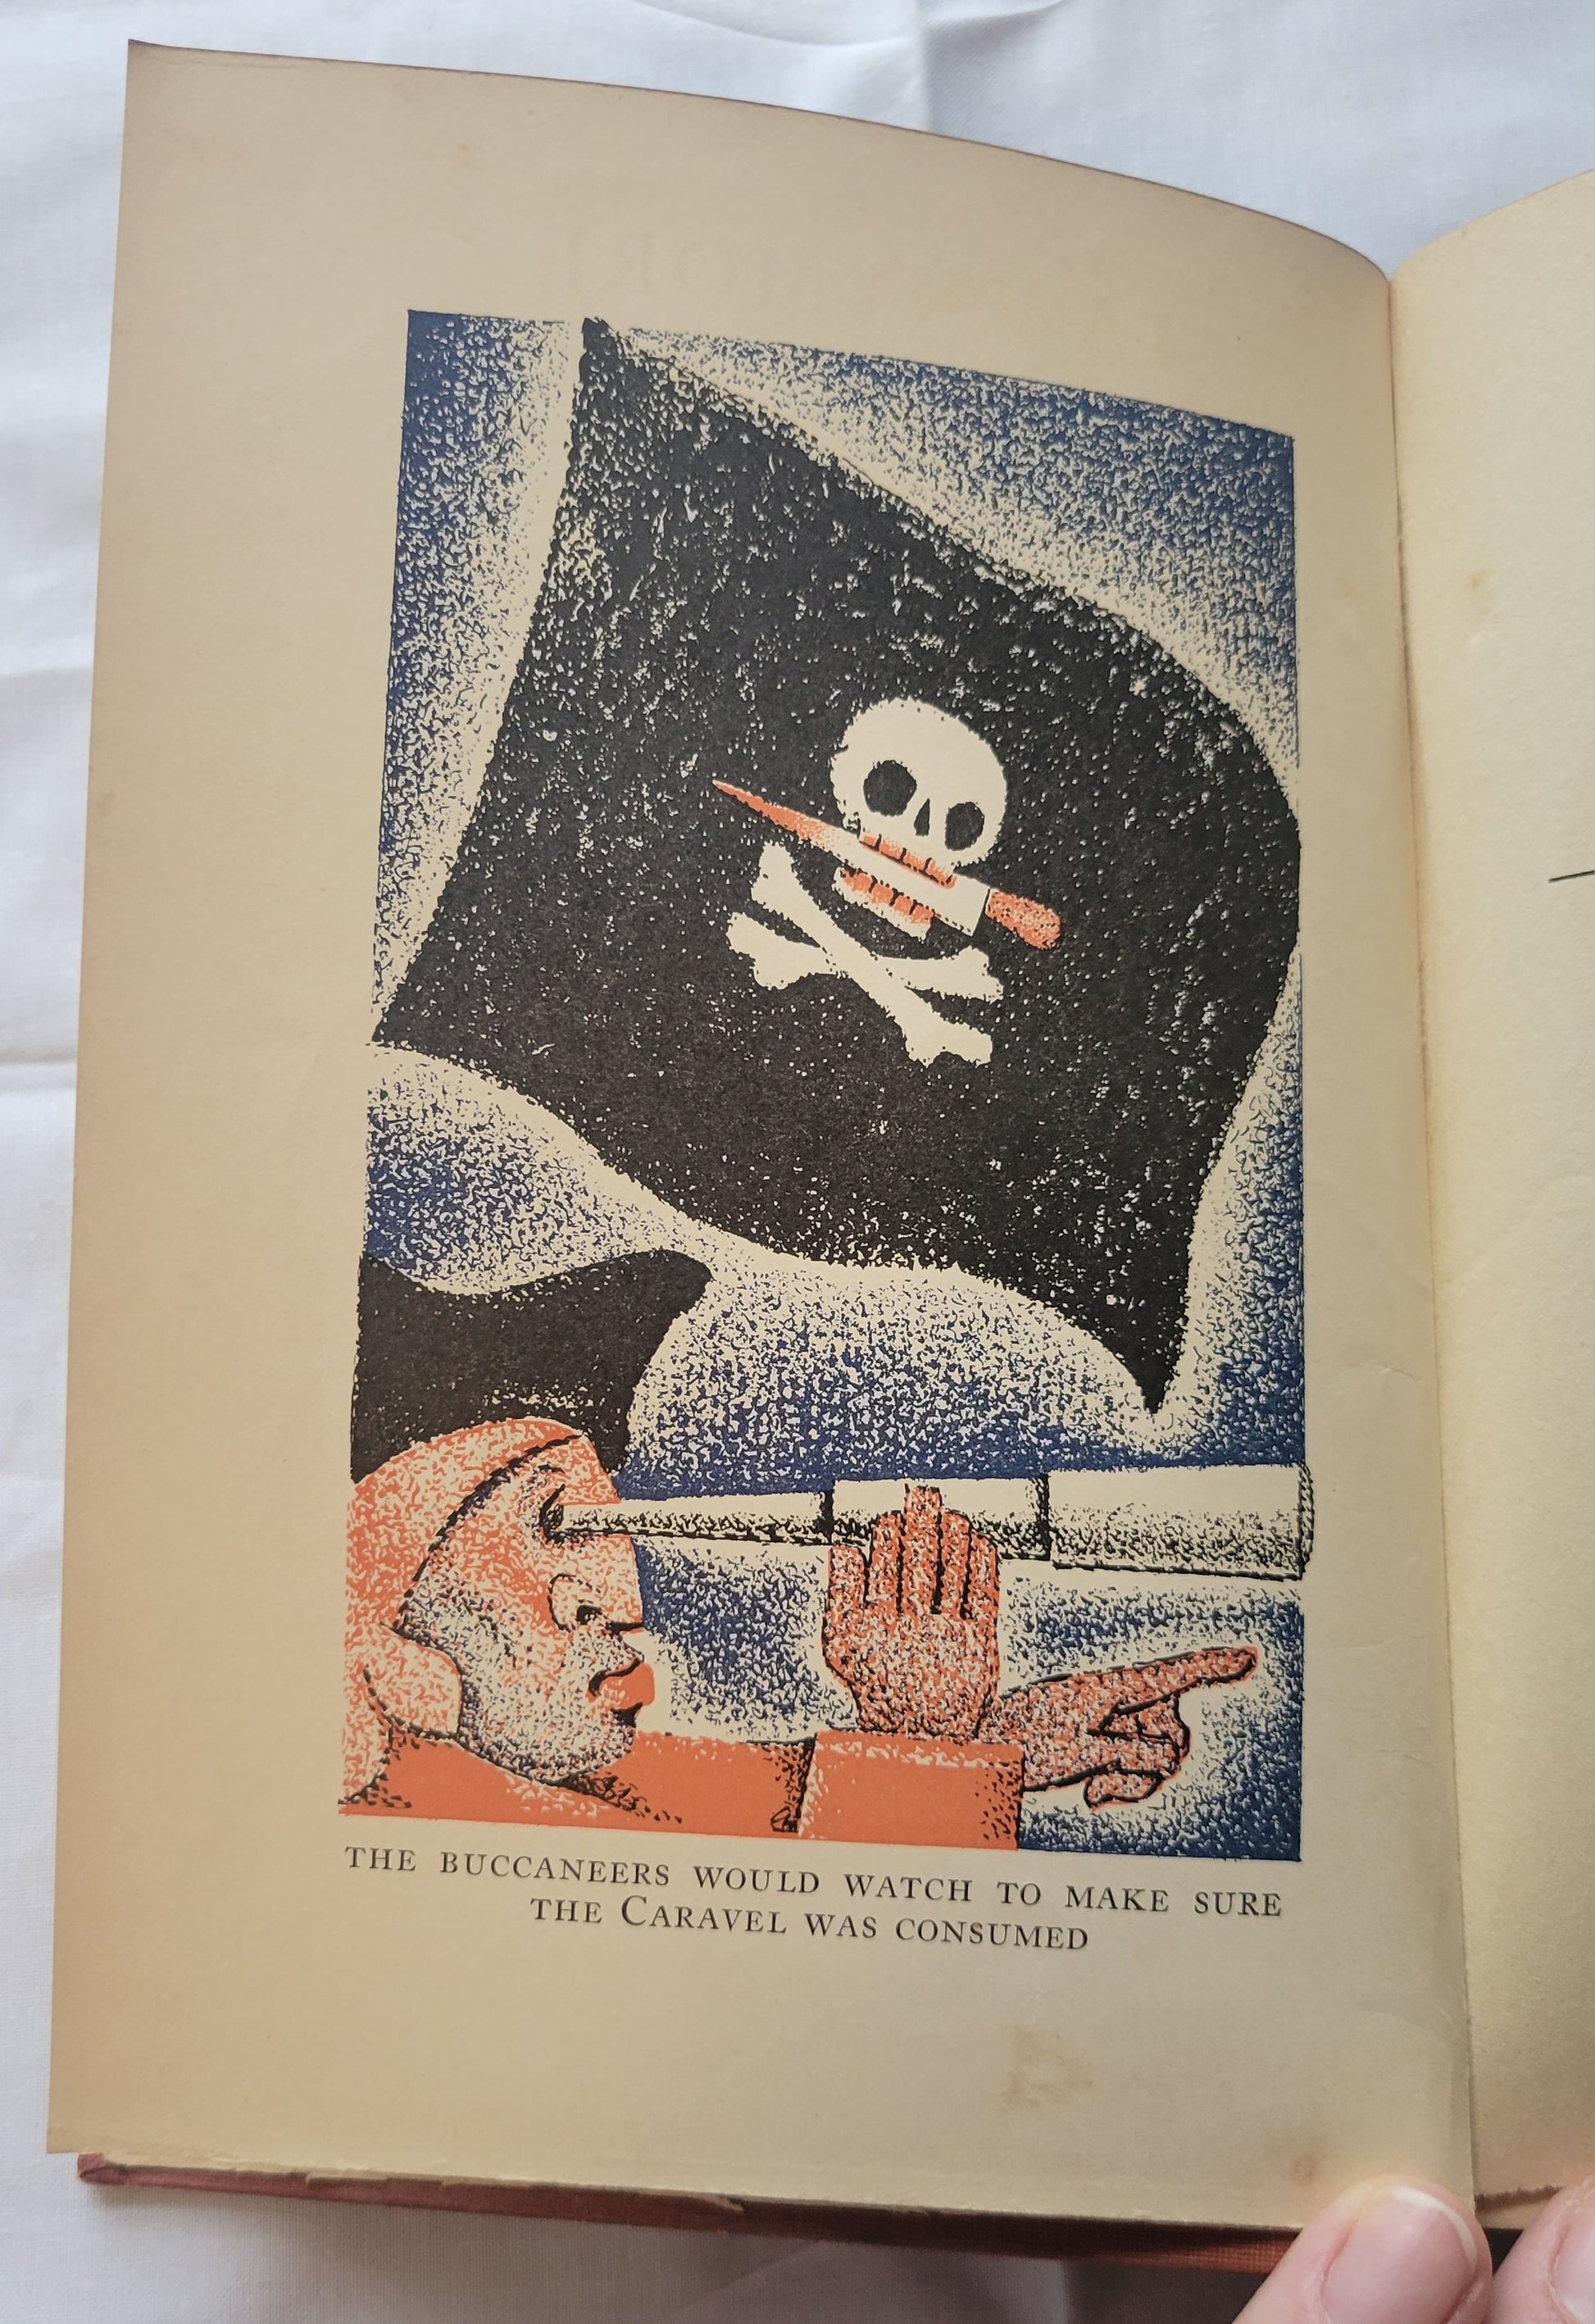 Vintage book for sale “Tawnymore” by Monica Shannon, illustrated by Jean Charlot, published by Doubleday, Doran, & Company in 1931. Illustration of buccaneer and pirate flag.